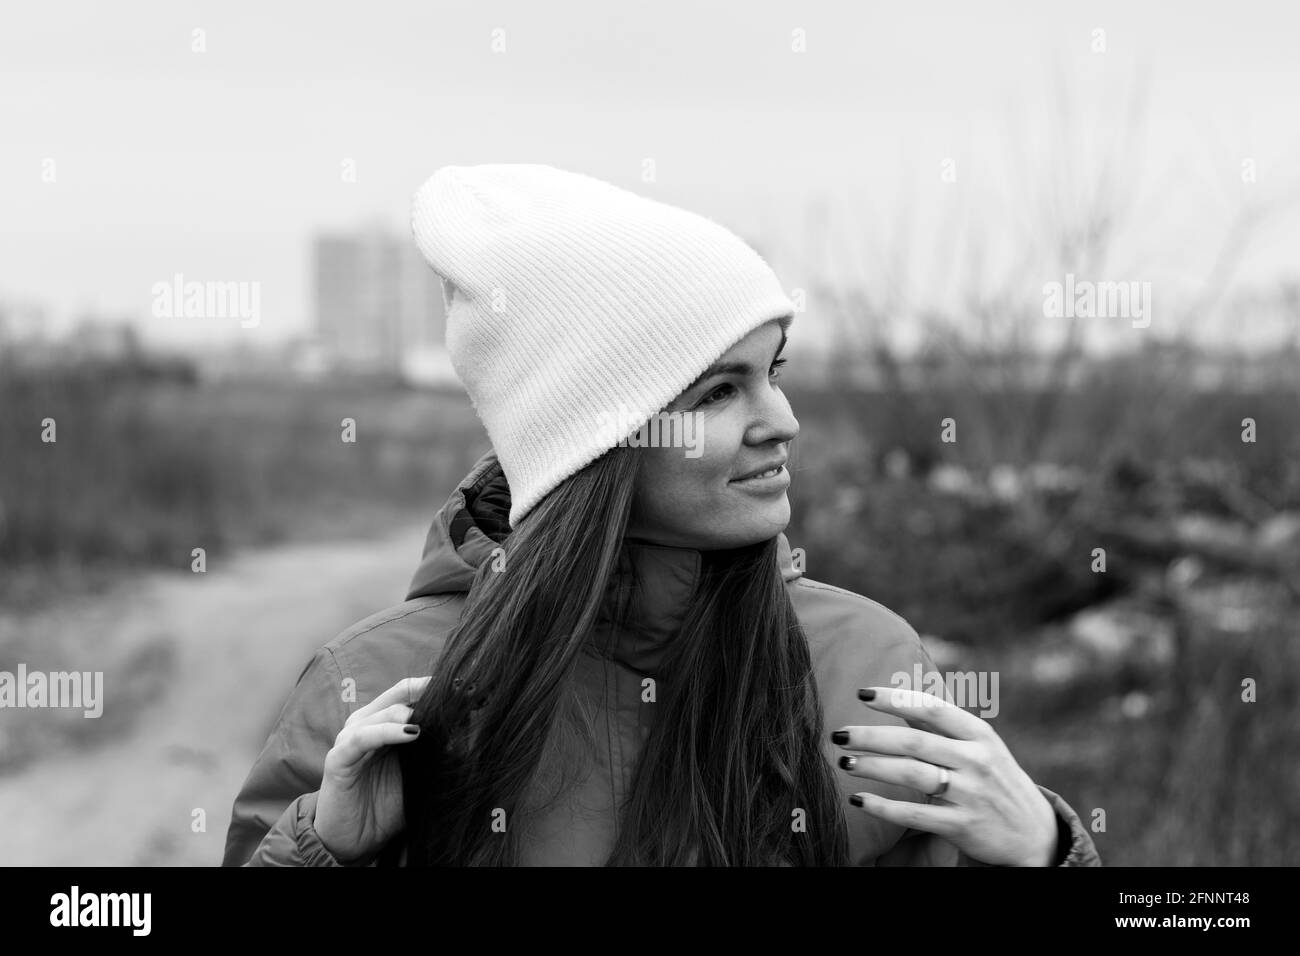 Smiling beautiful young woman with long hair in knitted hat looking away on the street on a cloudy day against a blurred background. Female without ma Stock Photo